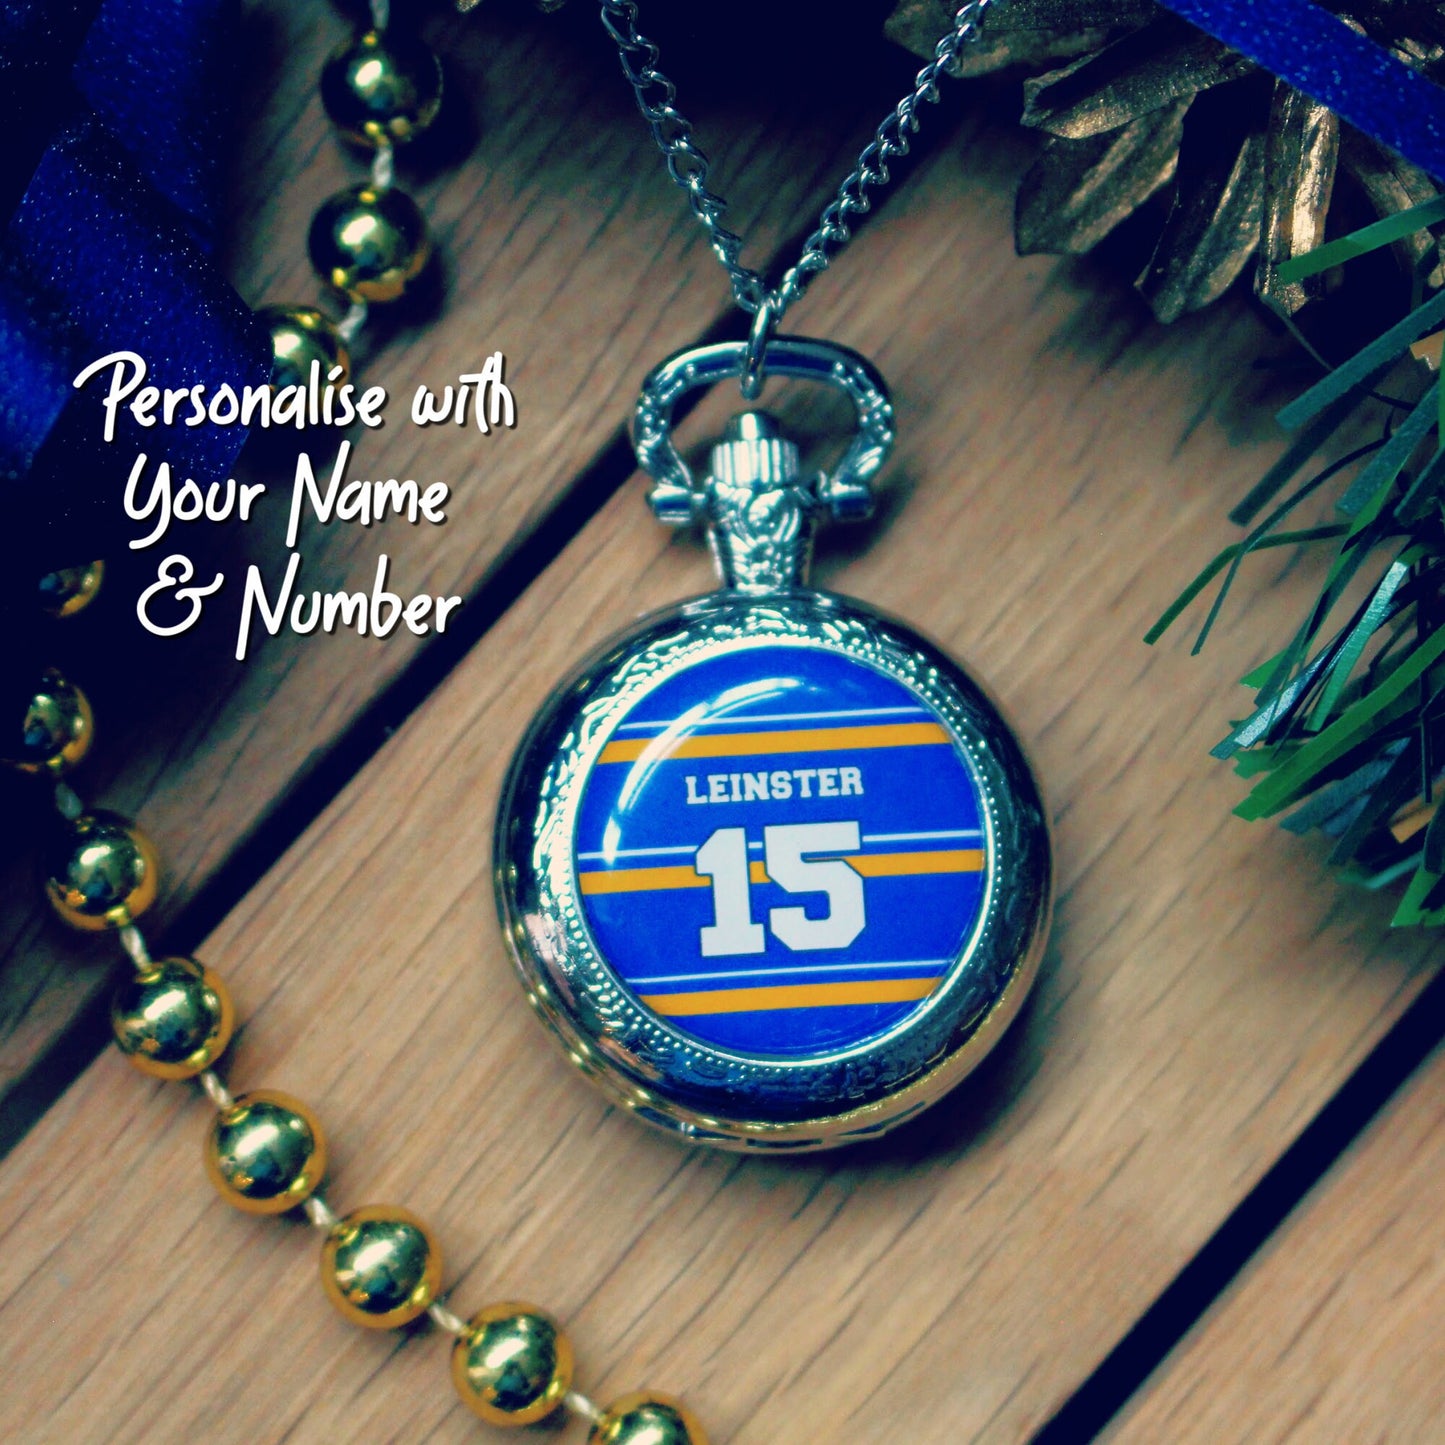 Leinster Rugby Pocket Watch. Personalised gift for rugby fan. Christmas present for men. PRO14 Rugby. Sports shirt Your name. Irish. Ireland